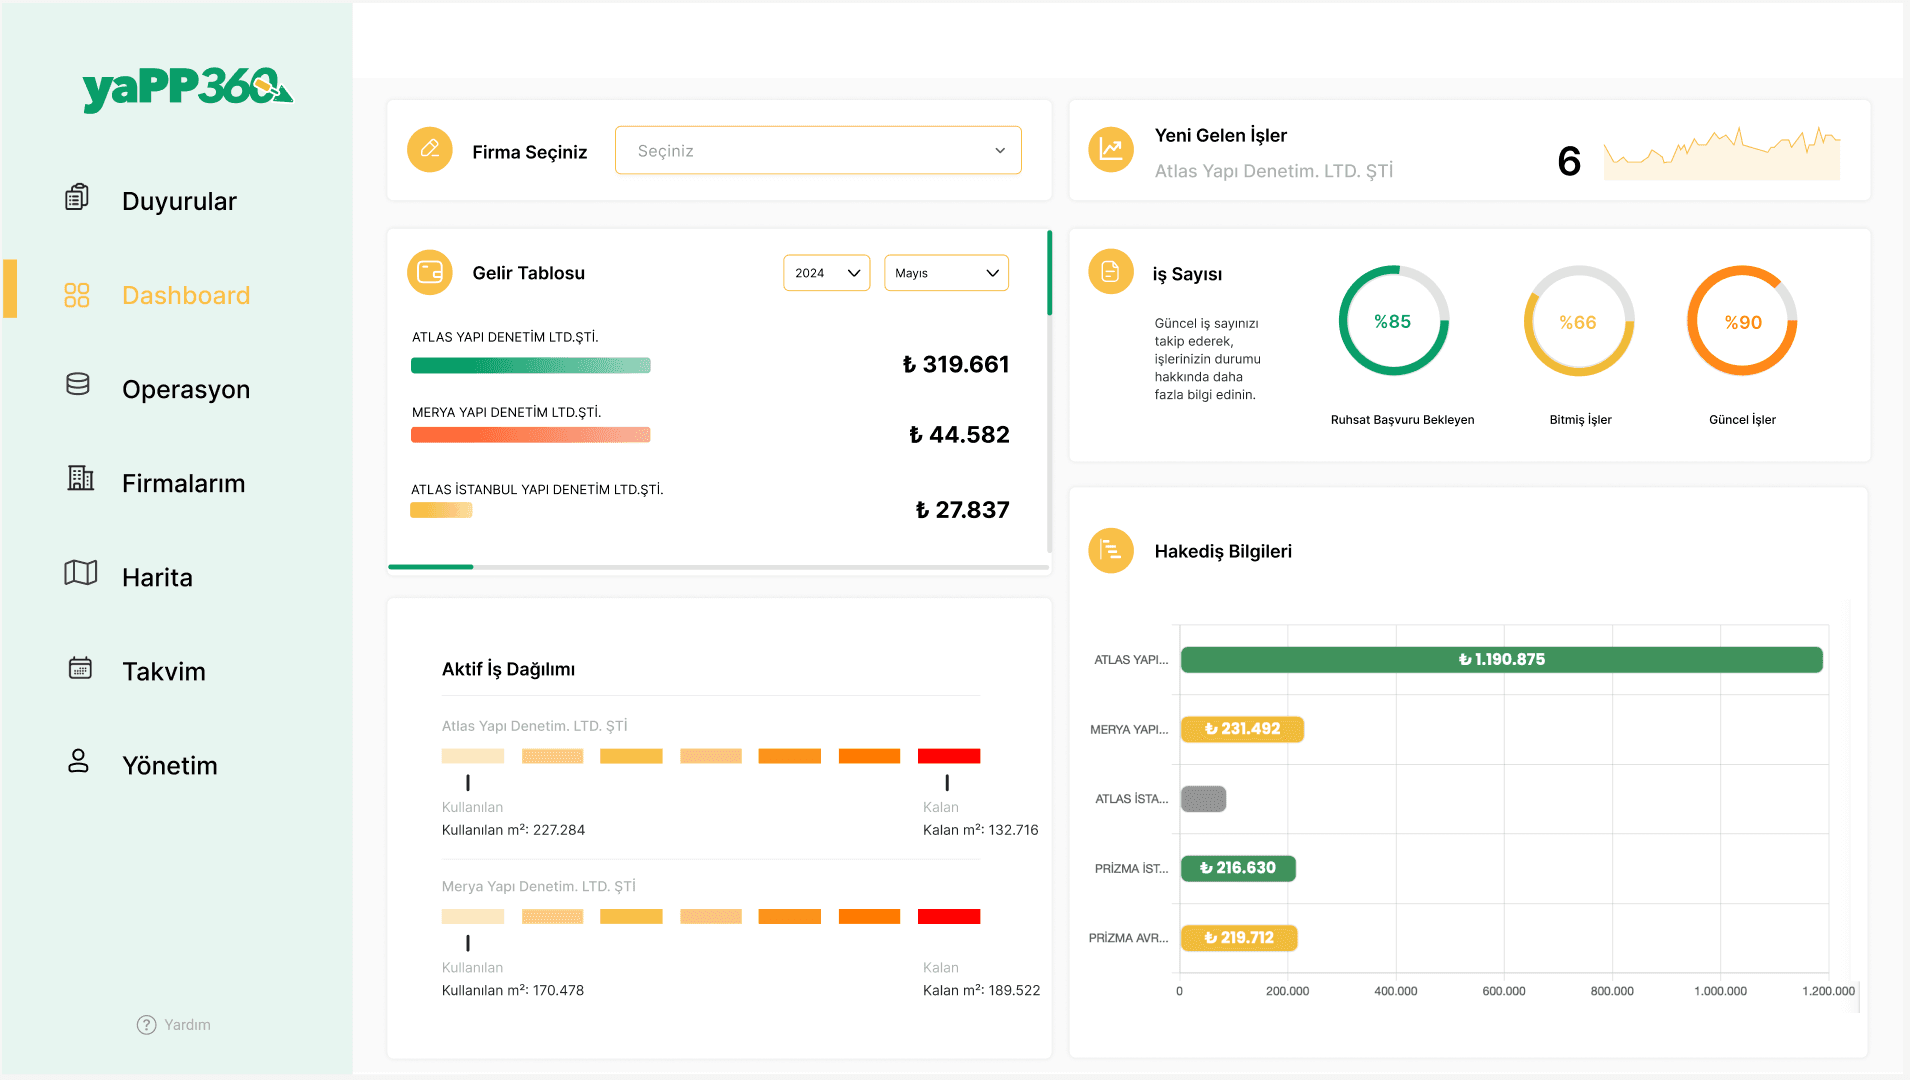 dashboard images